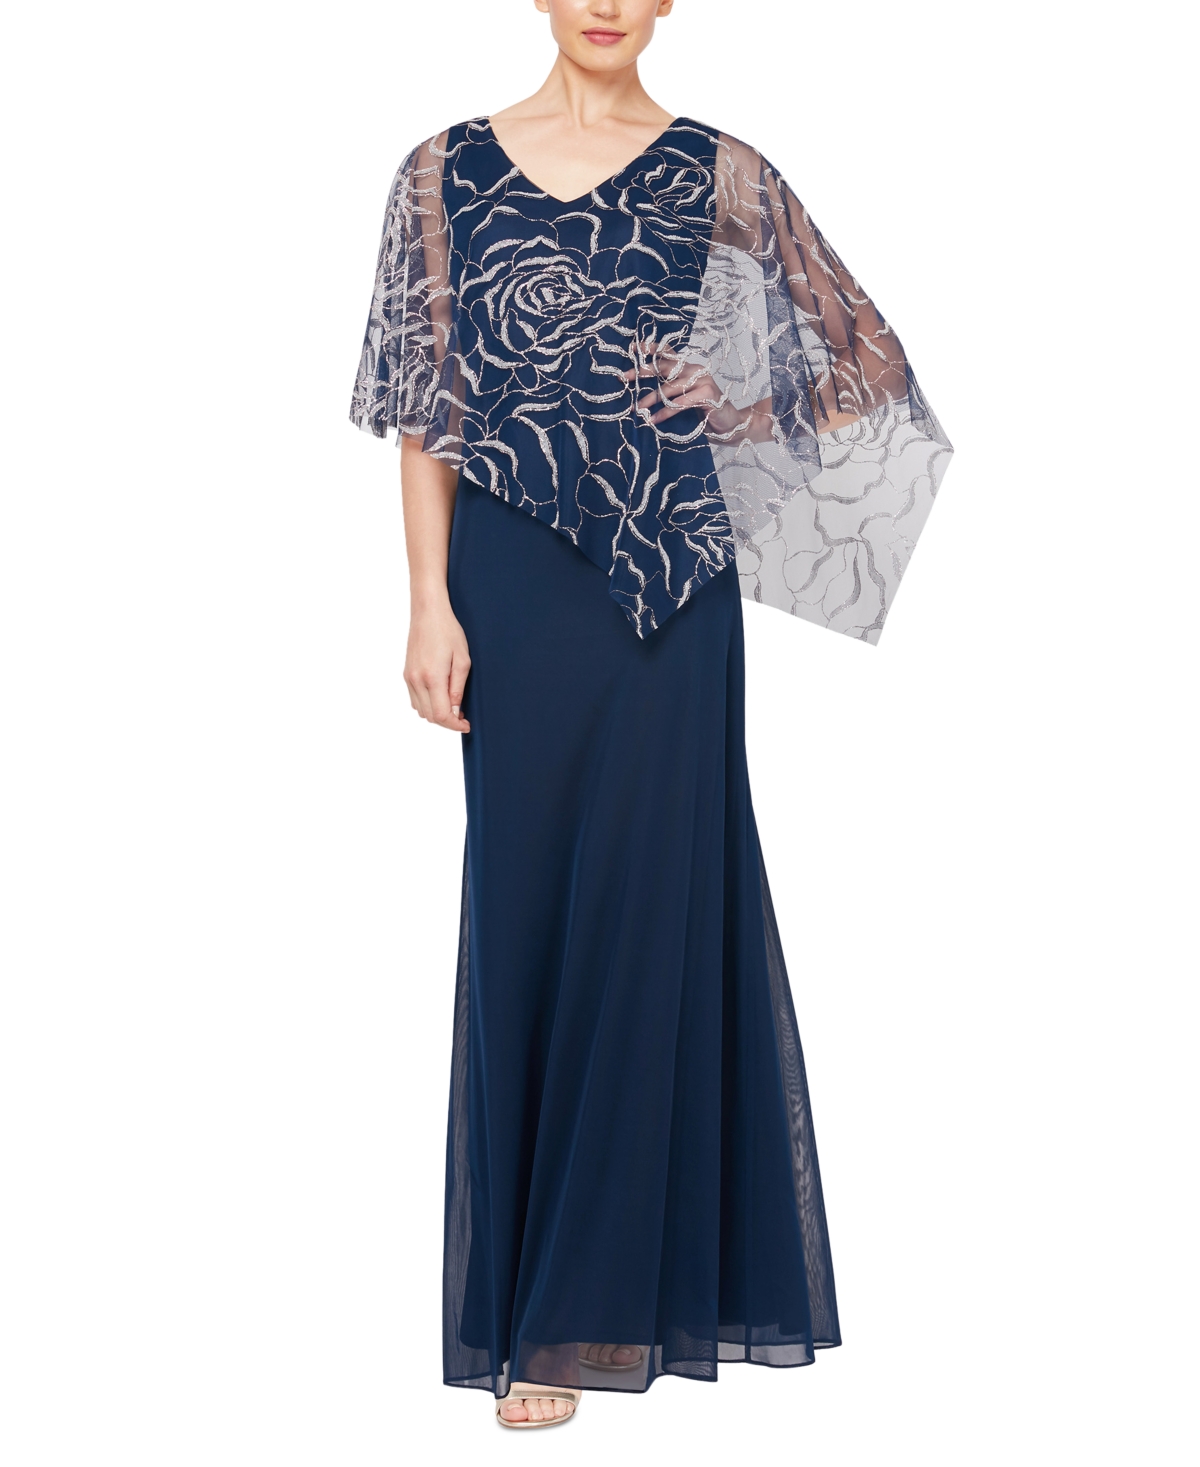 Popover V Neck Glitter Floral with Asymetric Cape - Navy